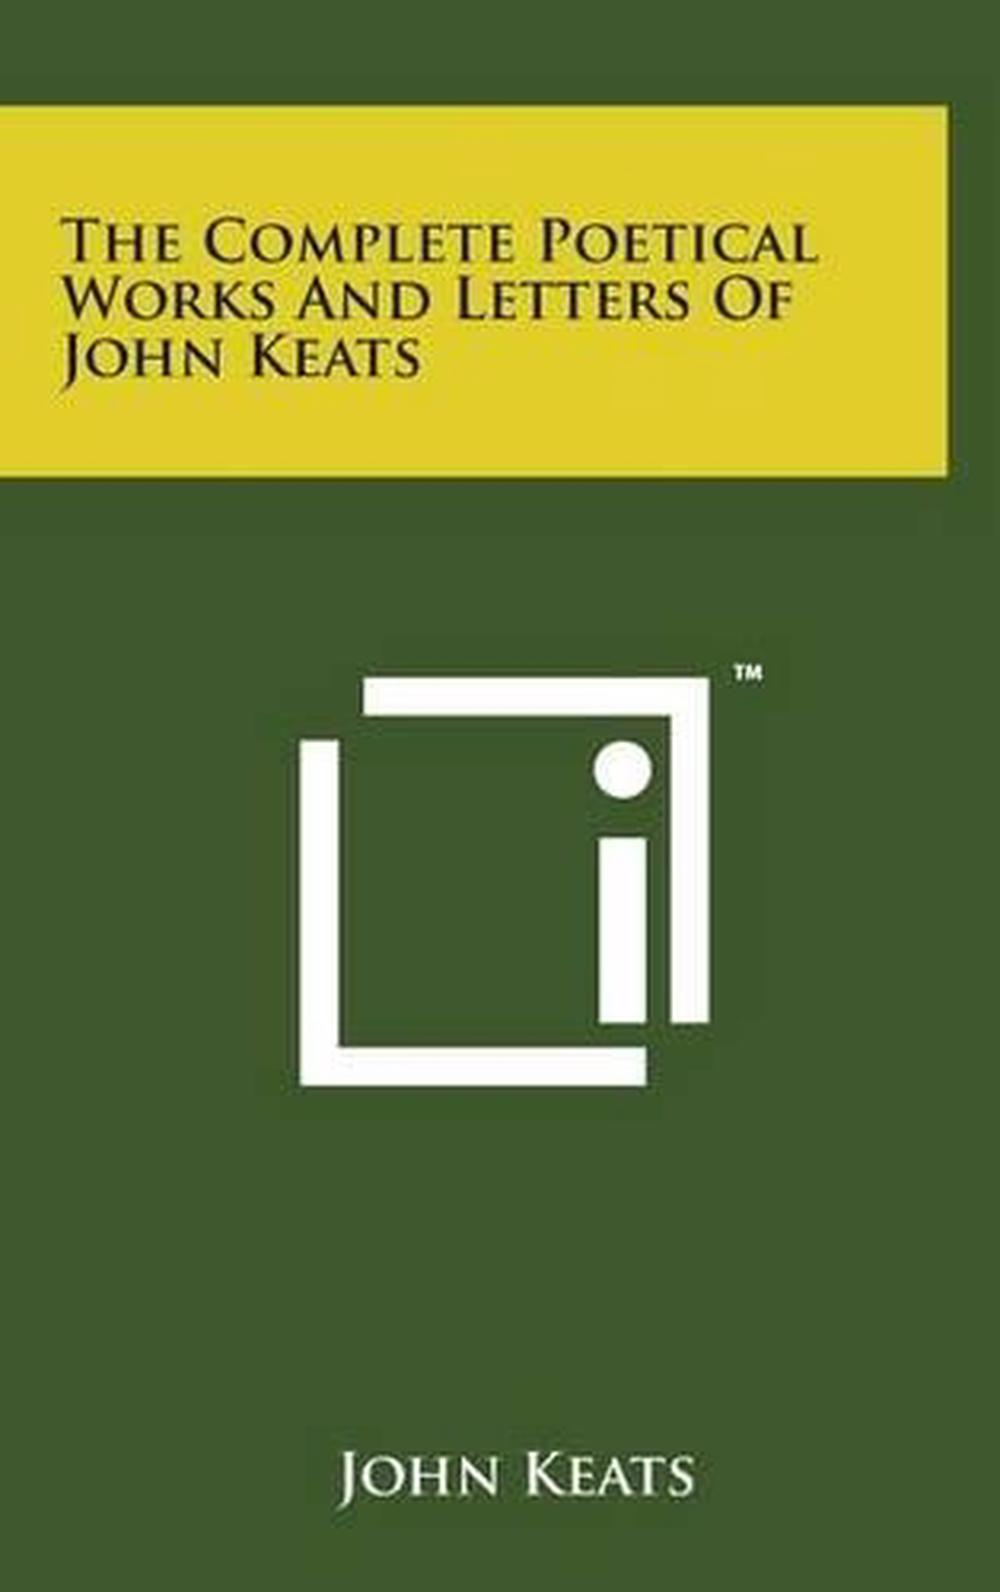 The Complete Poetical Works and Letters of John Keats by John Keats